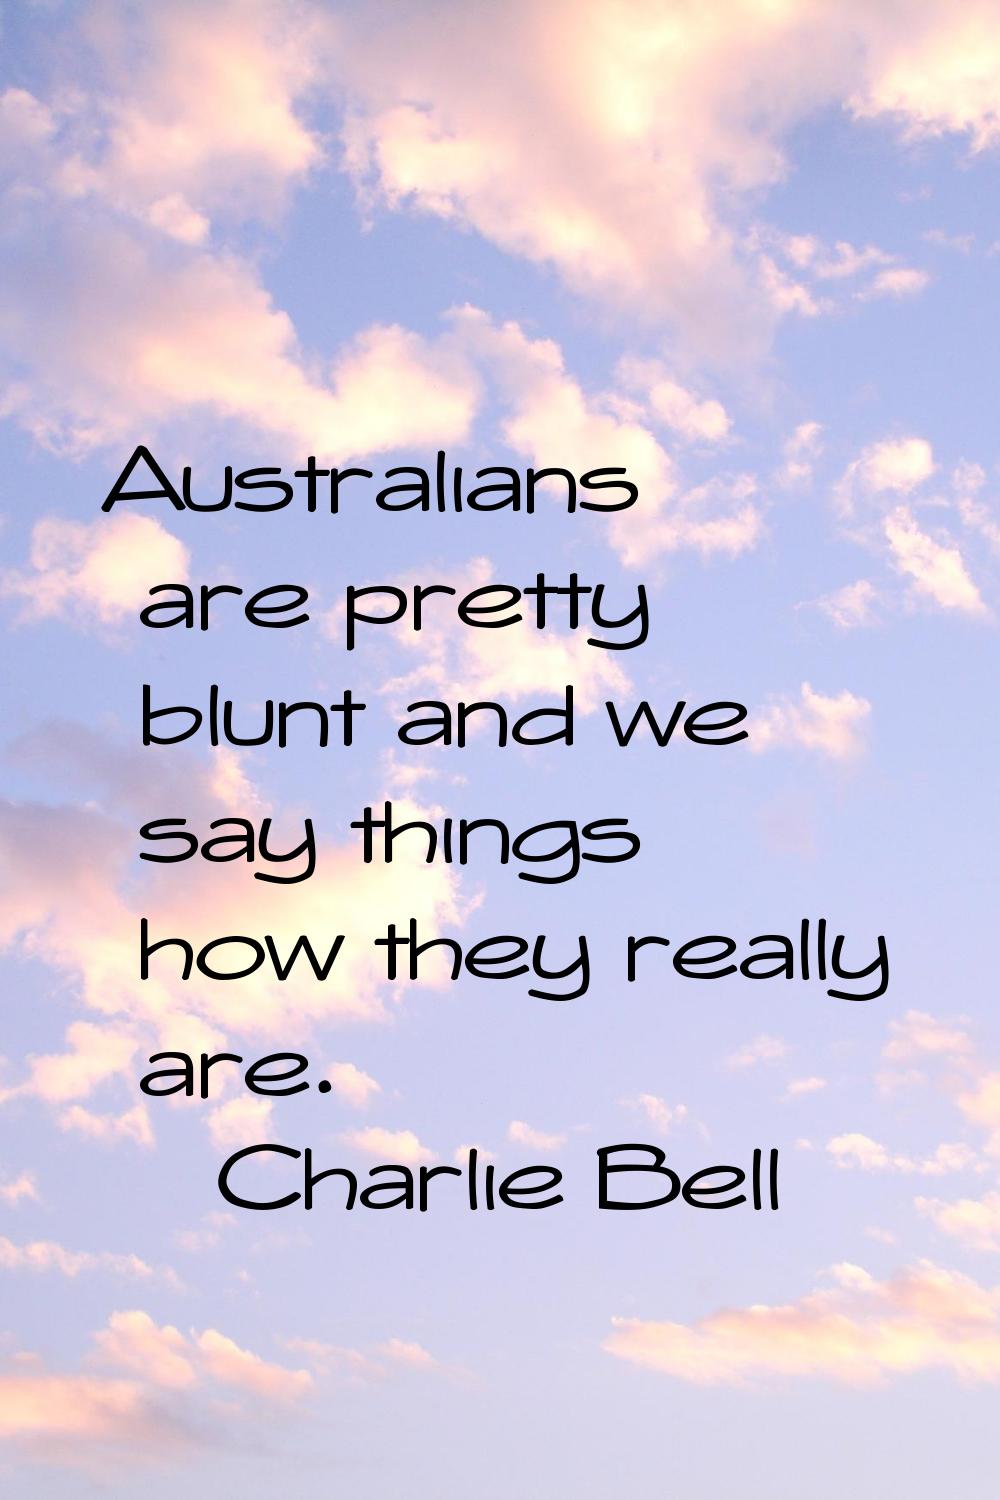 Australians are pretty blunt and we say things how they really are.